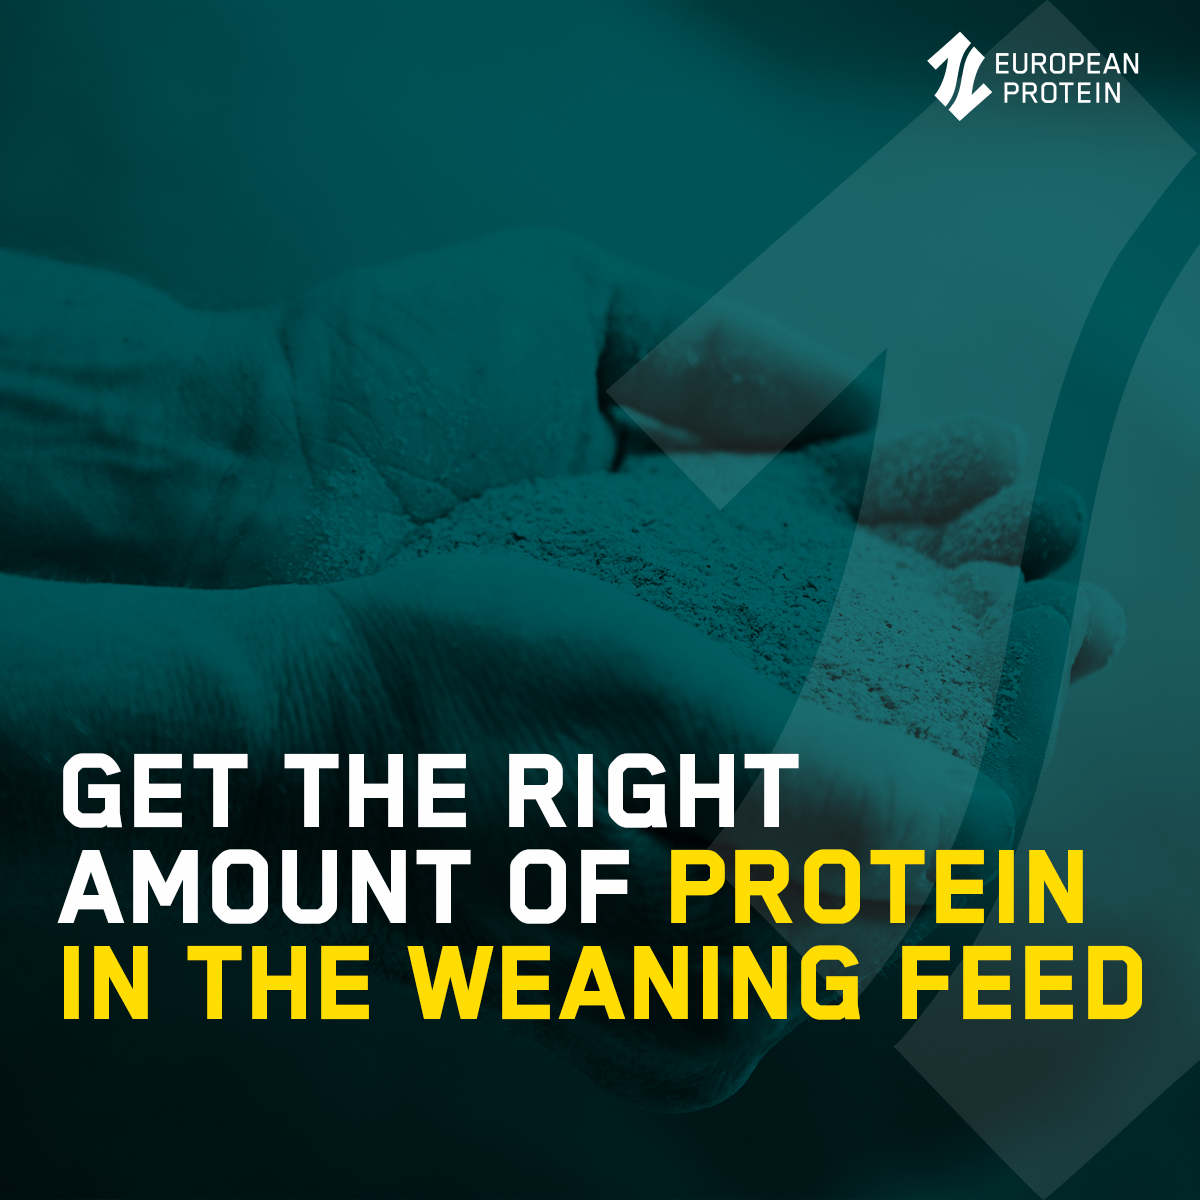 Get the right amount of protien in the weaning feed